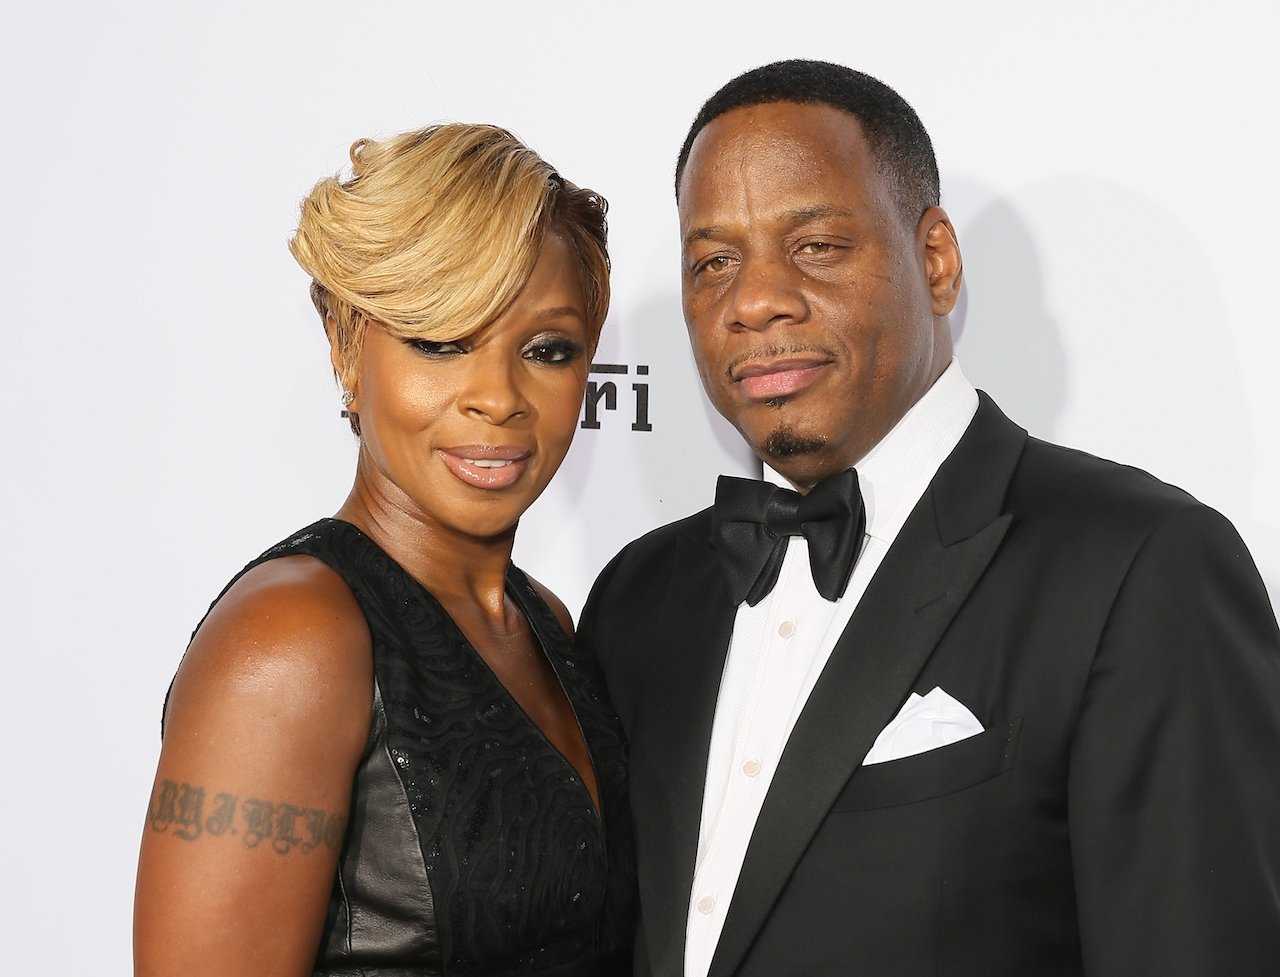 Mary J. Blige and Kendu Isaacs pose on red carpet; Blige won't perform "Be Without You" because the song is about Isaacs